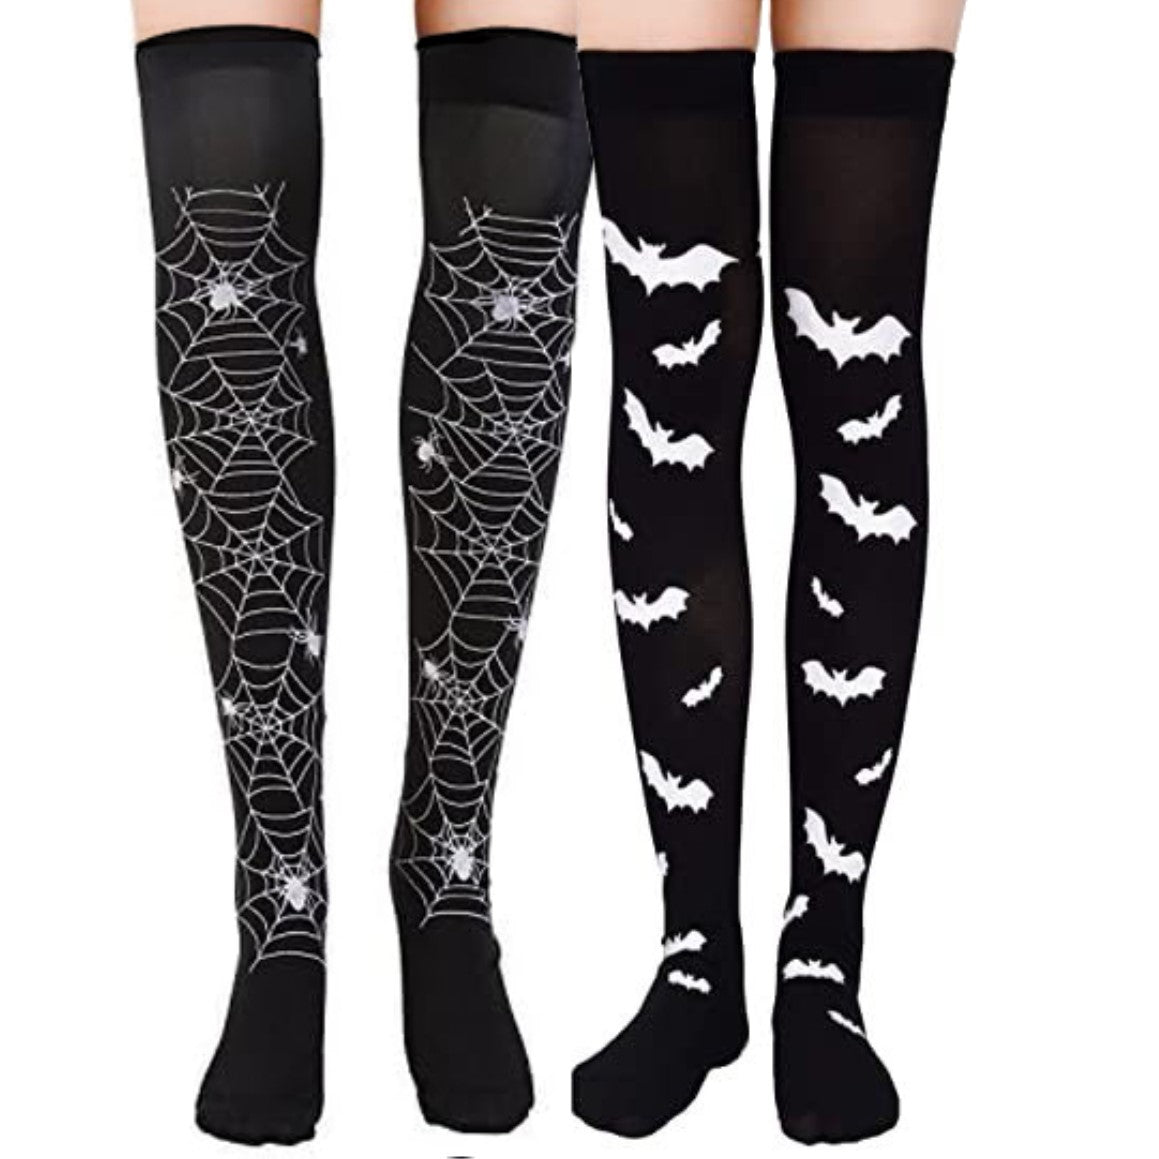 Ro Rox Over The Knee knitted Gothic Socks, Spiderweb